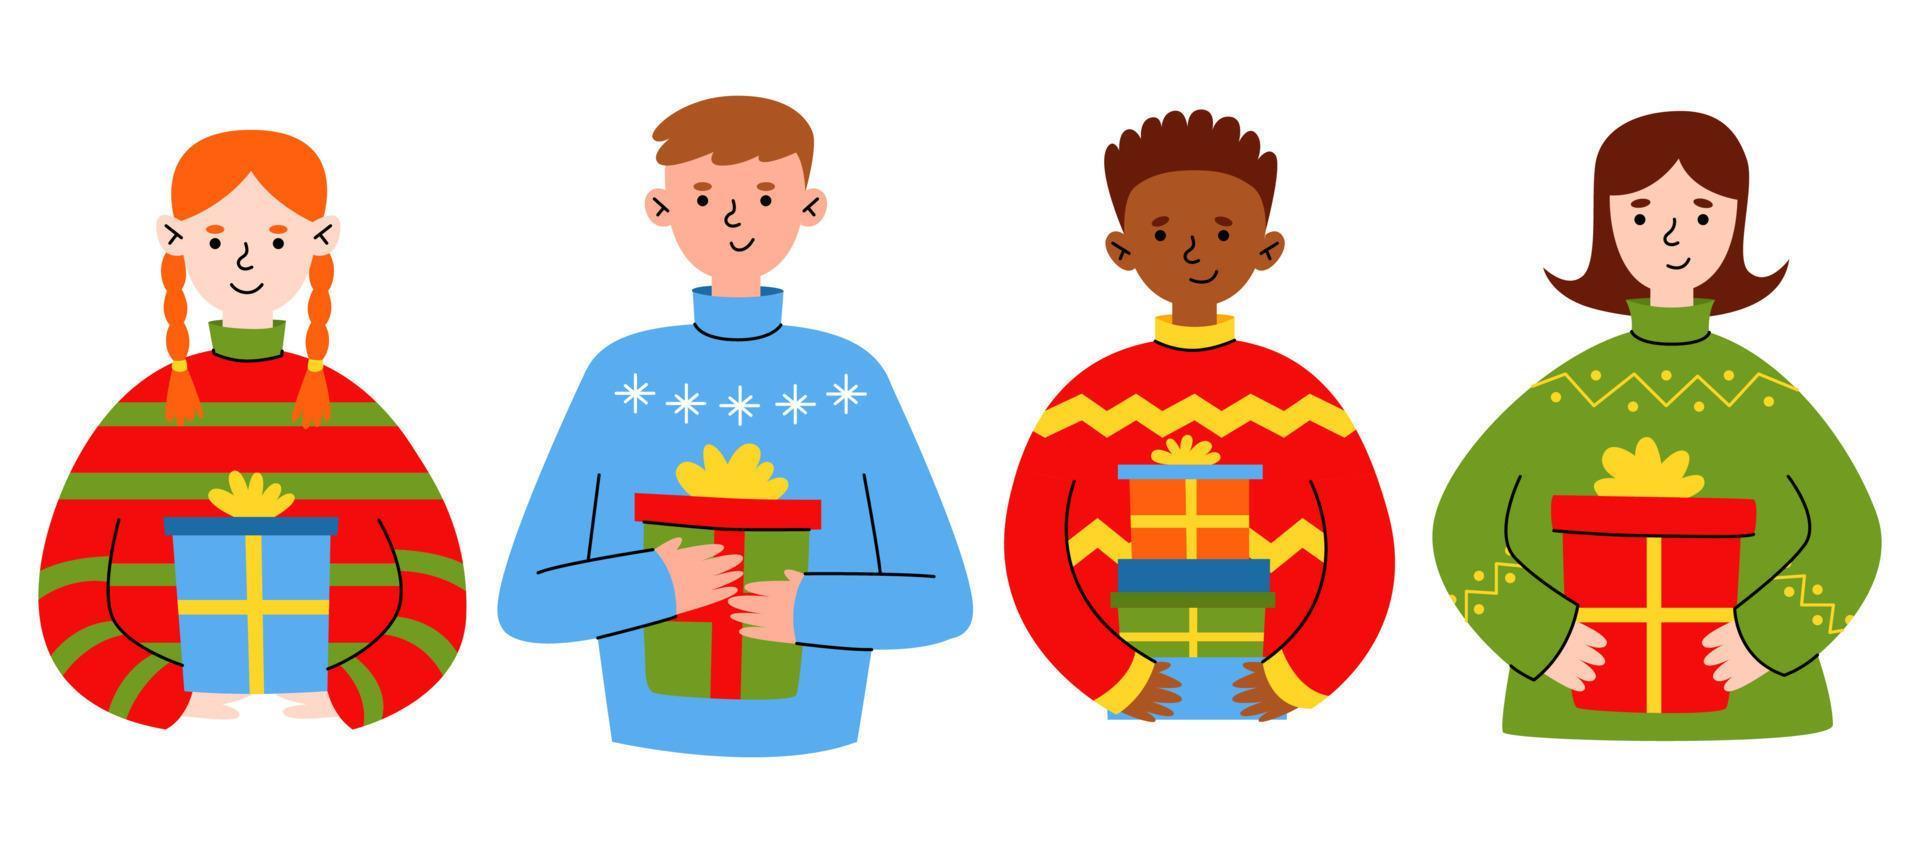 Diverse people with New Year gifts. Funny cartoon characters preparing for Christmas. Men and women receiving presents. Christmas sale or Secret Santa surprises concept. Vector flat illustration.